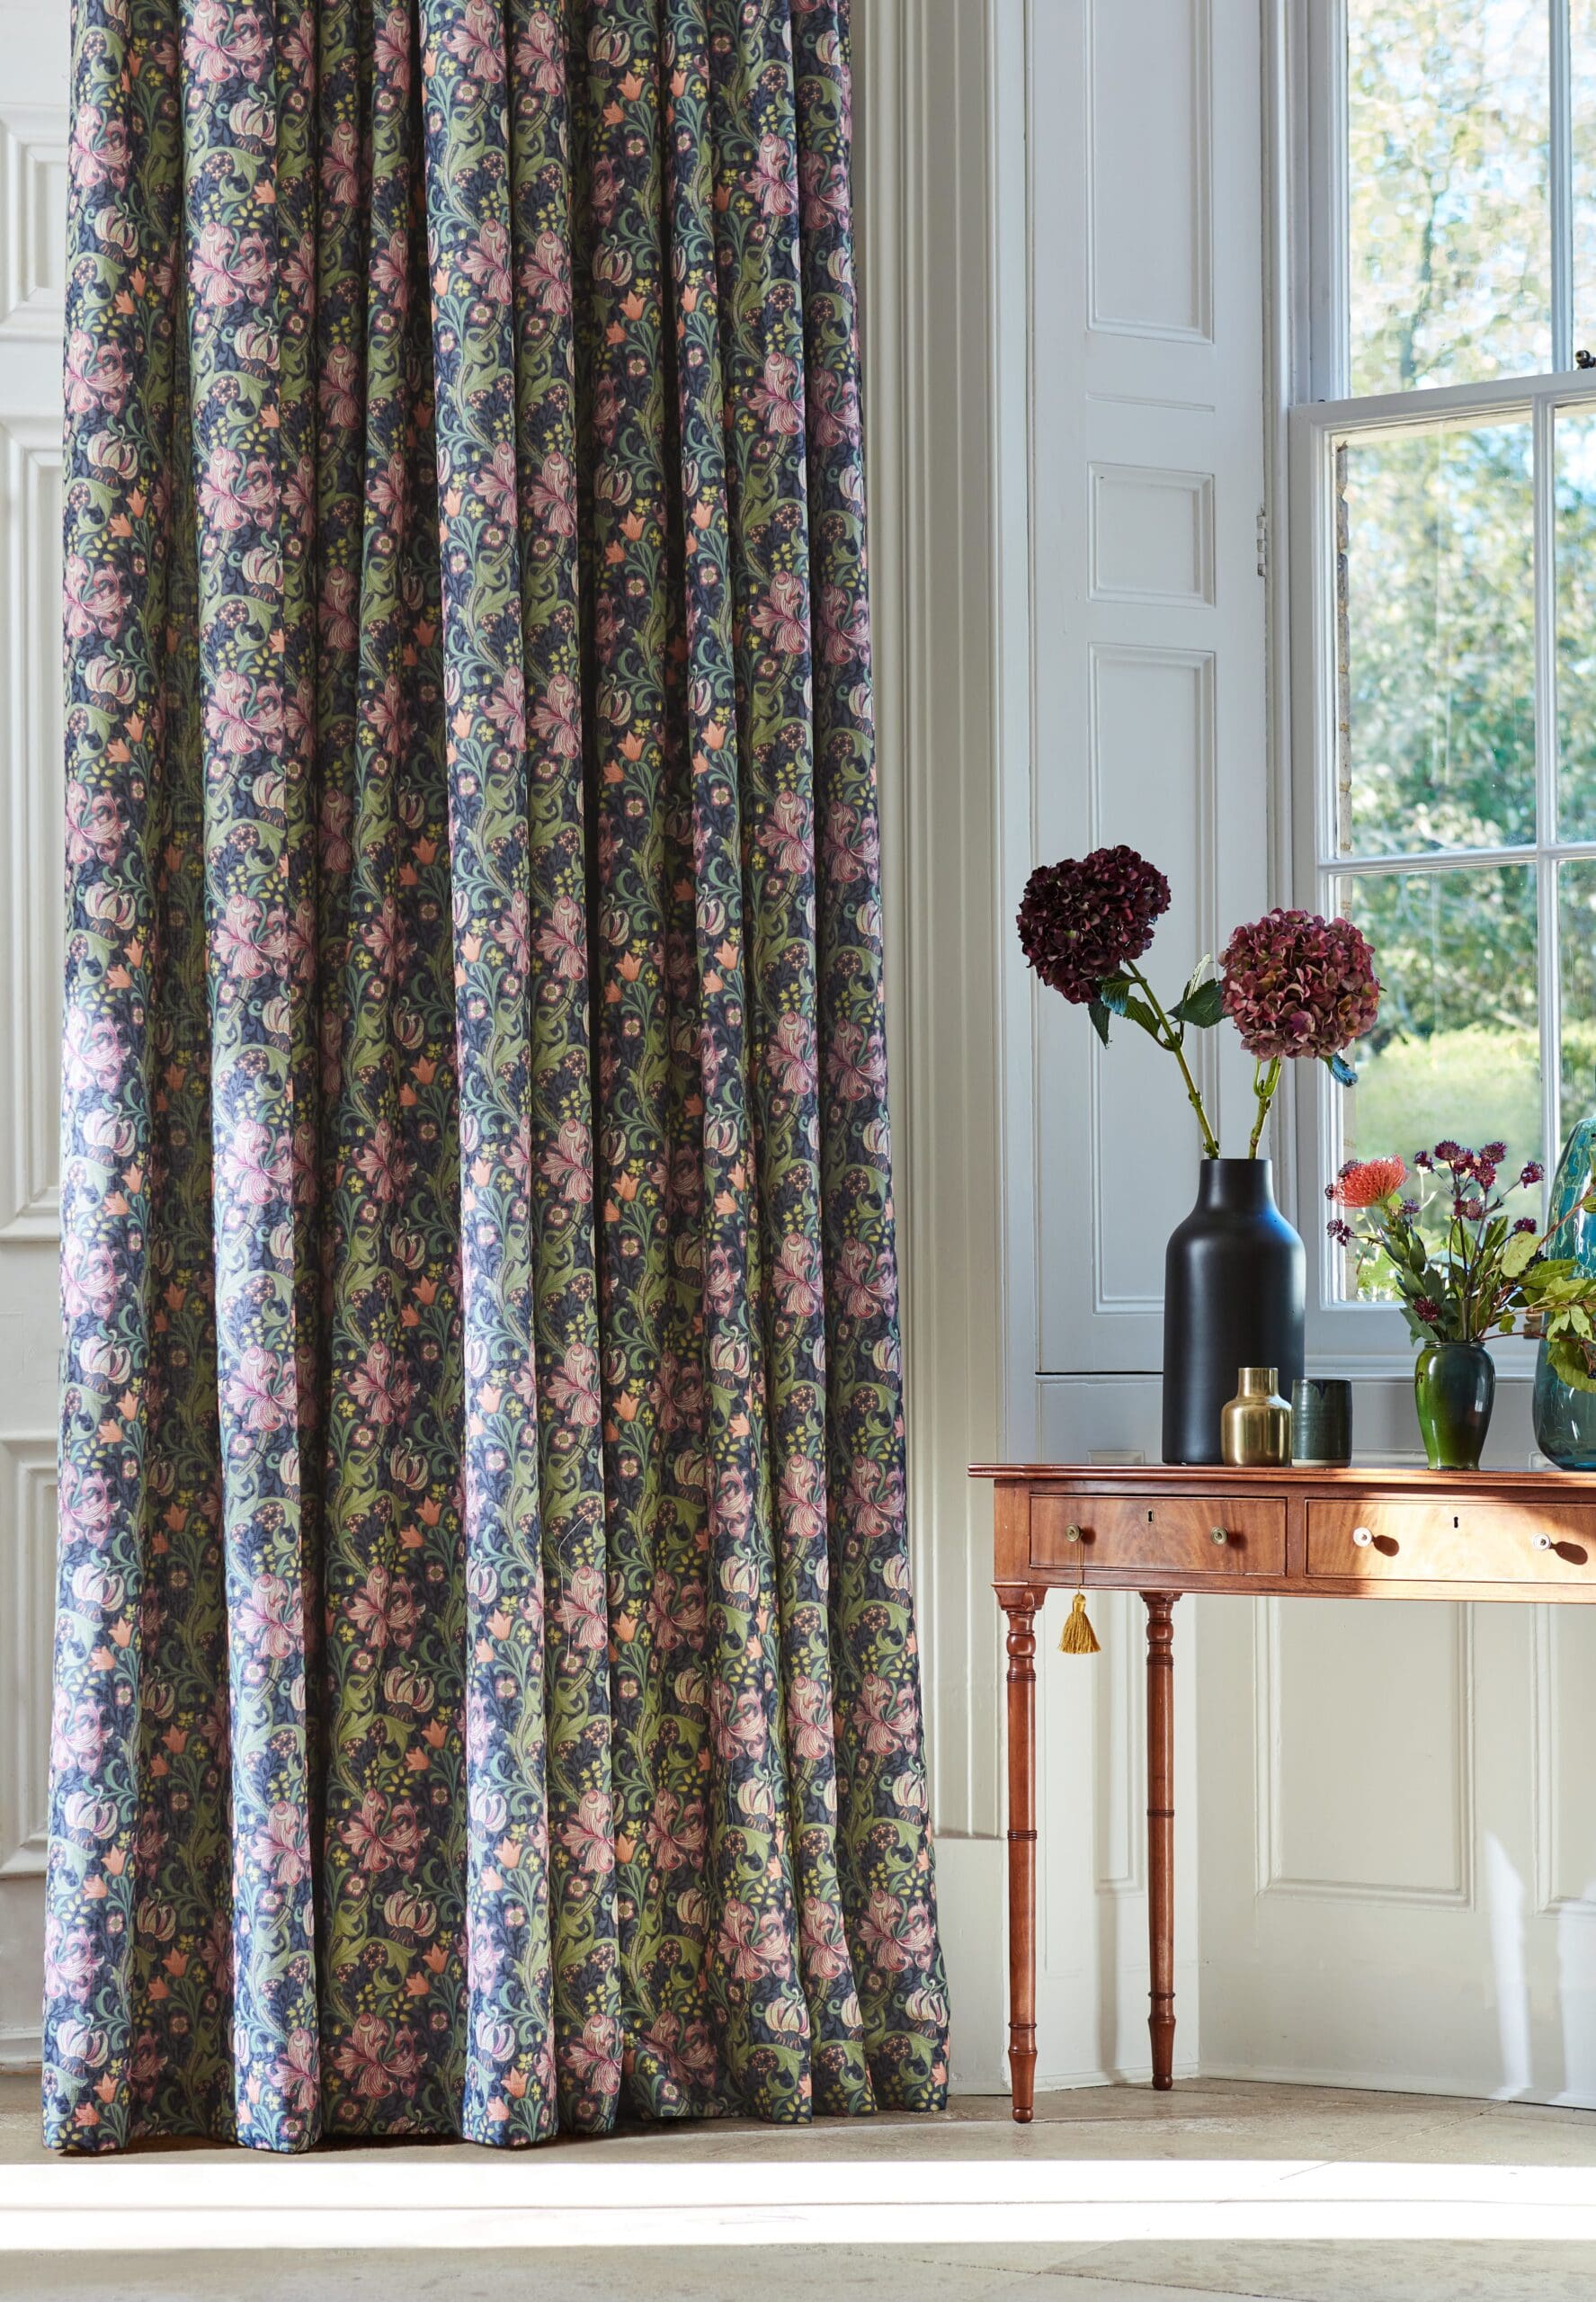 Curtains - your guide to the perfect window dressing